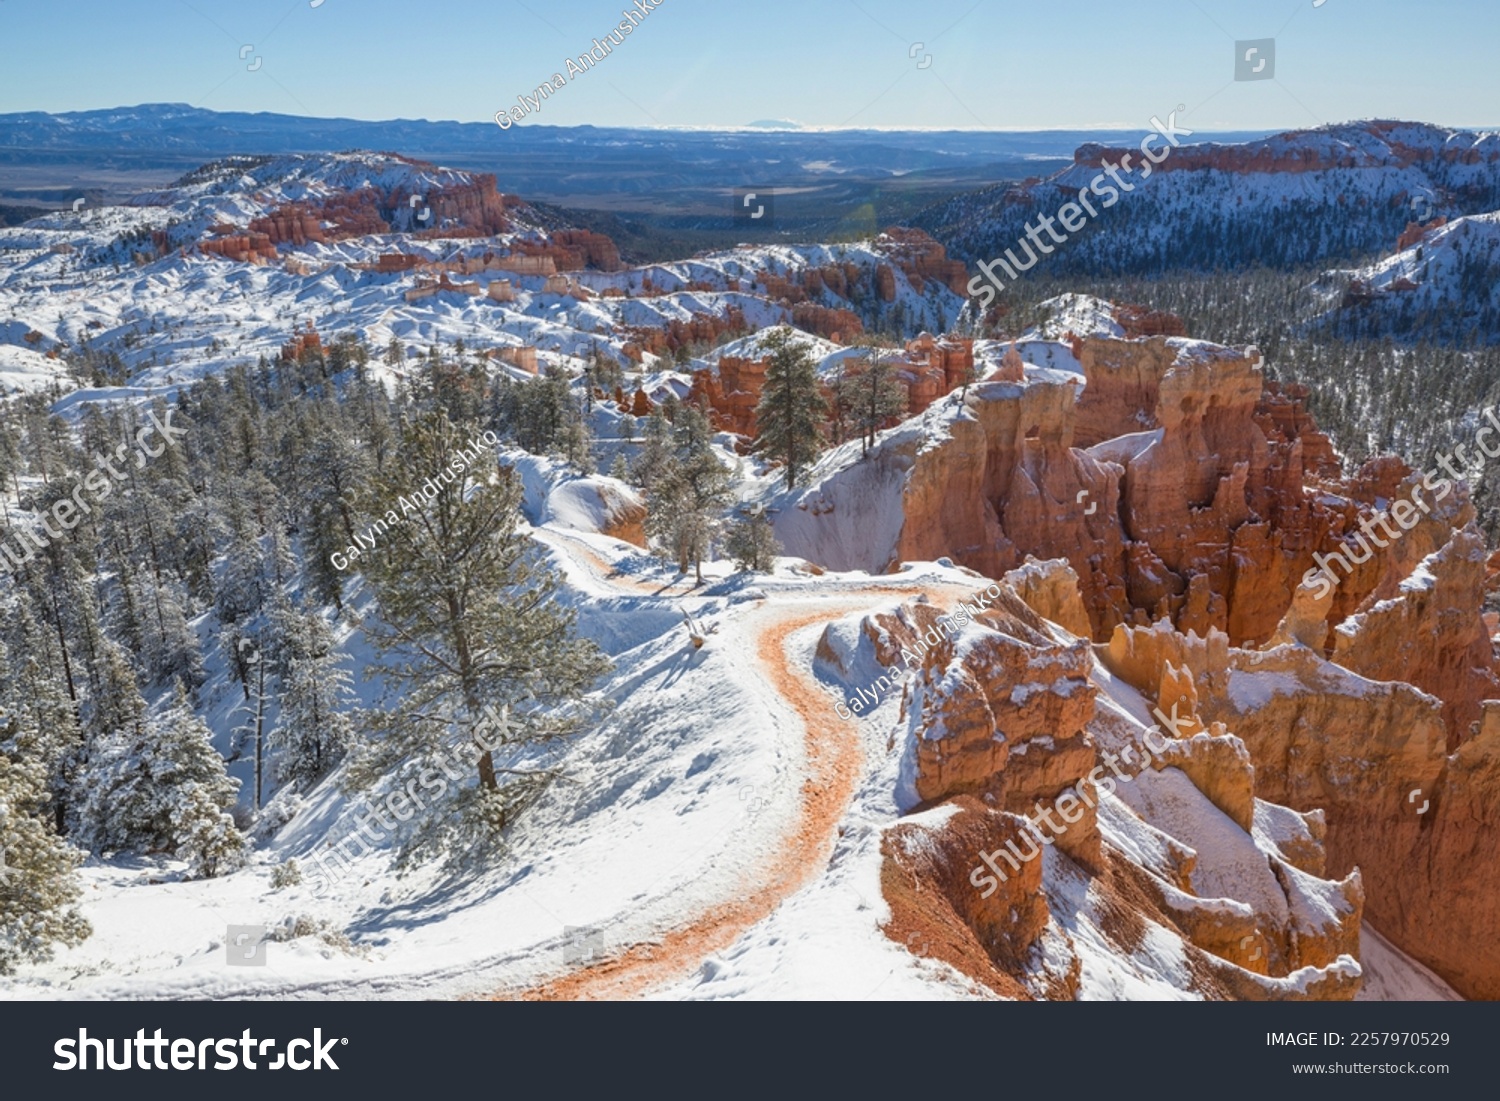 Picturesque colorful pink rocks of the Bryce Canyon National park in the winter season, Utah, USA #2257970529